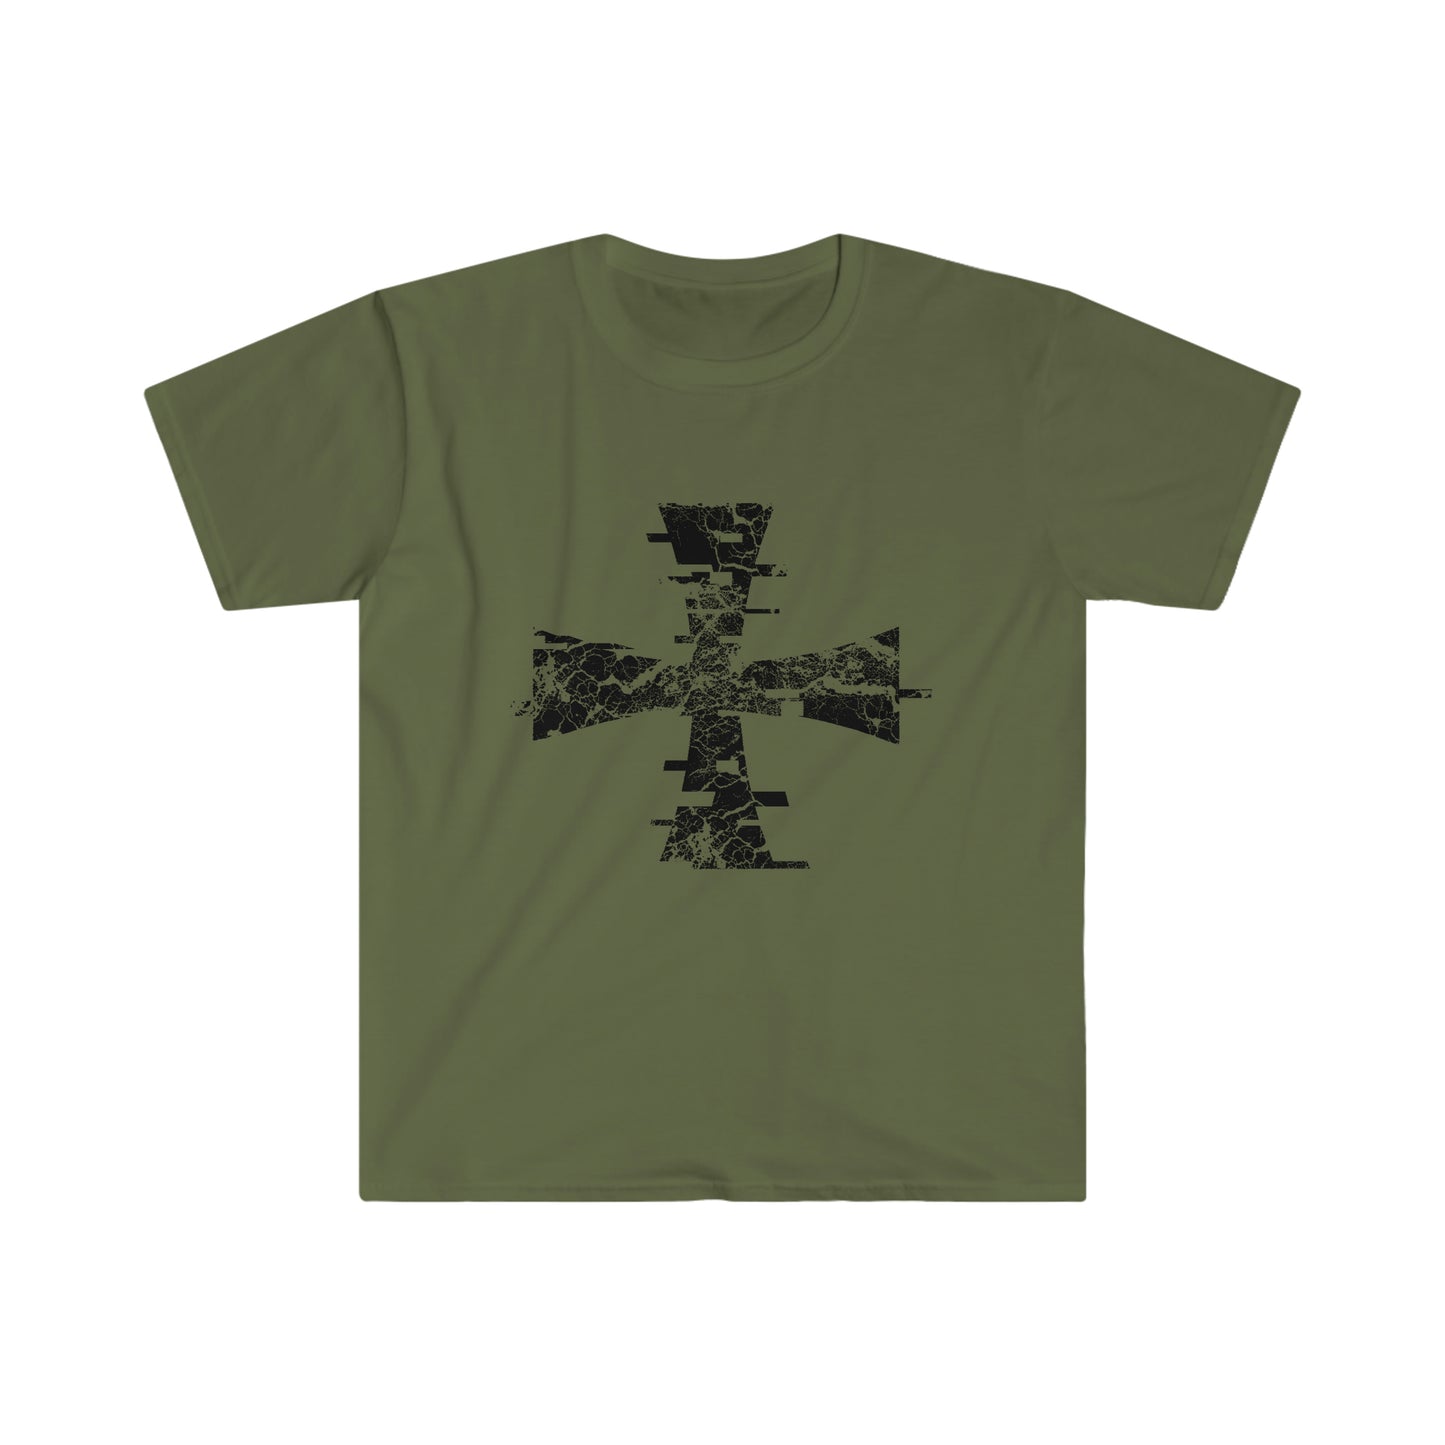 Olive Green T-Shirt with a distressed black digitial crusader logo by Sanctus Servo